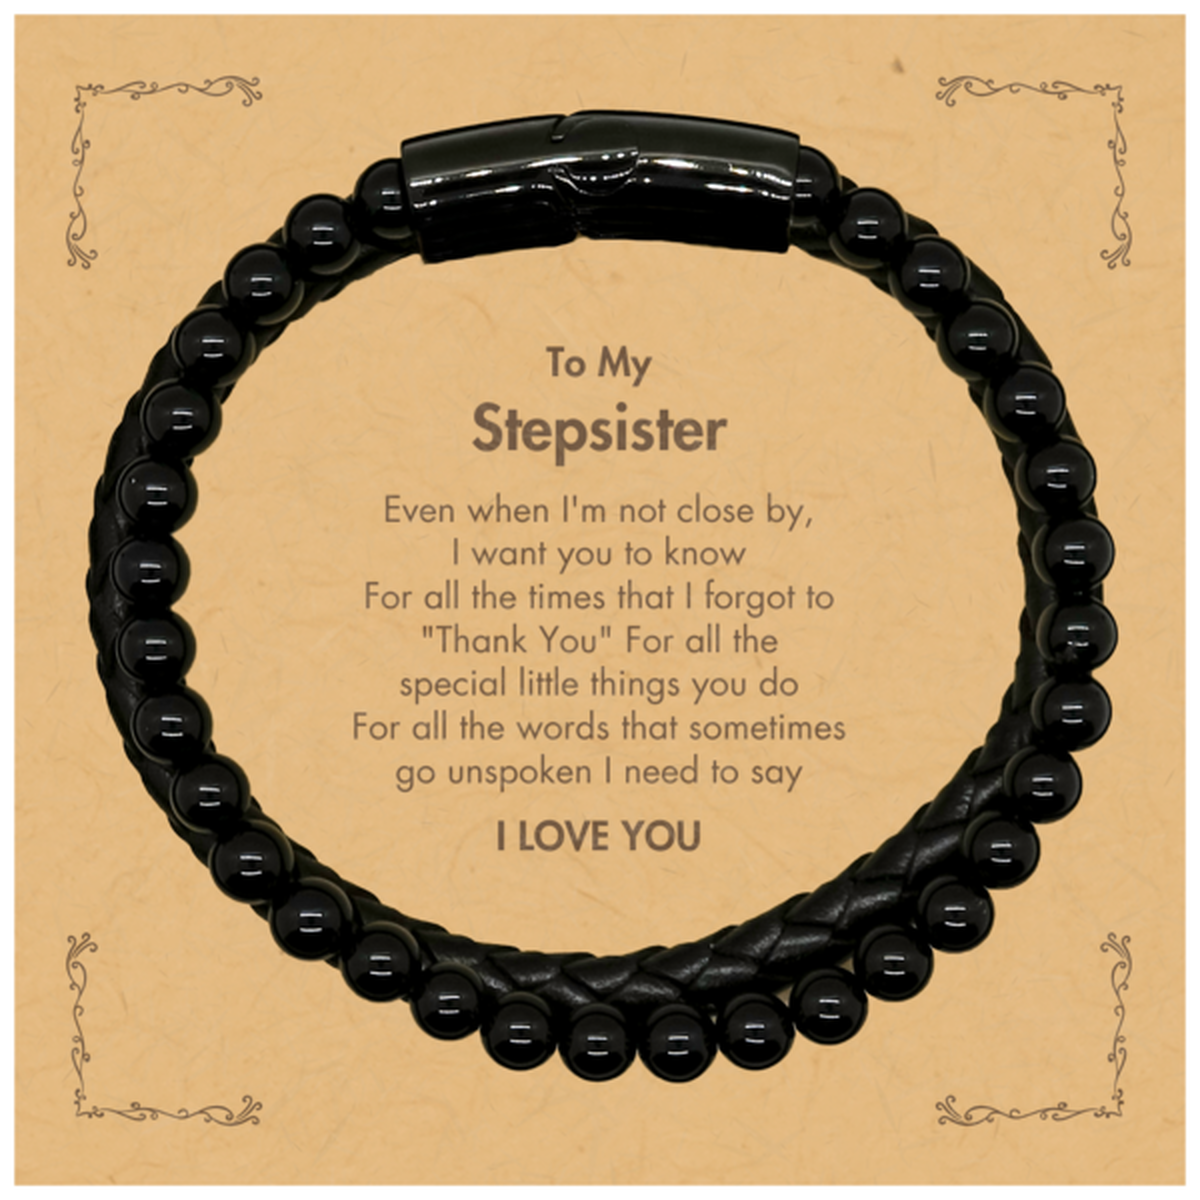 Thank You Gifts for Stepsister, Keepsake Stone Leather Bracelets Gifts for Stepsister Birthday Mother's day Father's Day Stepsister For all the words That sometimes go unspoken I need to say I LOVE YOU